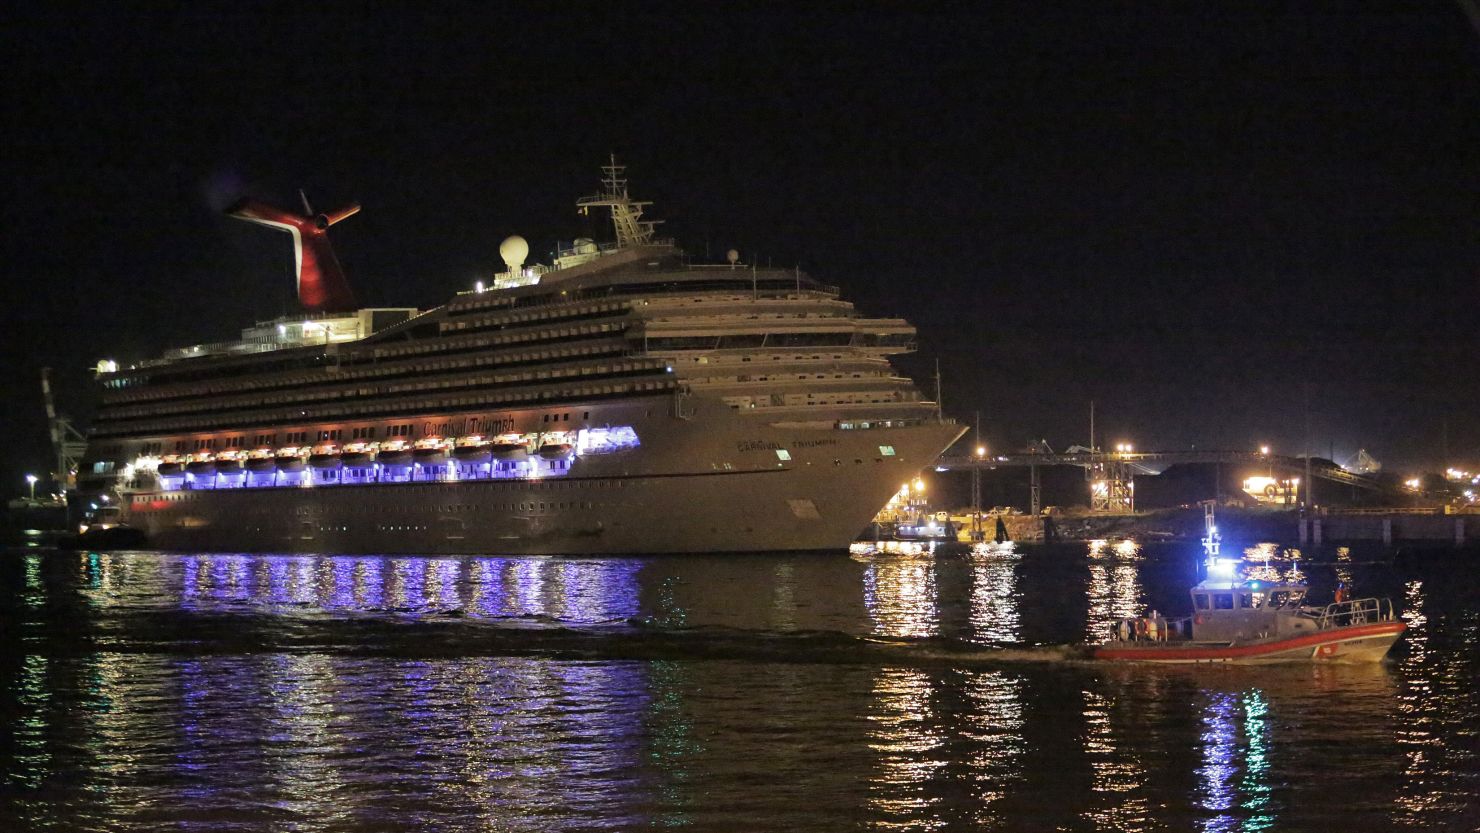 In February, the Carnival cruise ship Triumph was stranded for days after an engine fire crippled the ship.